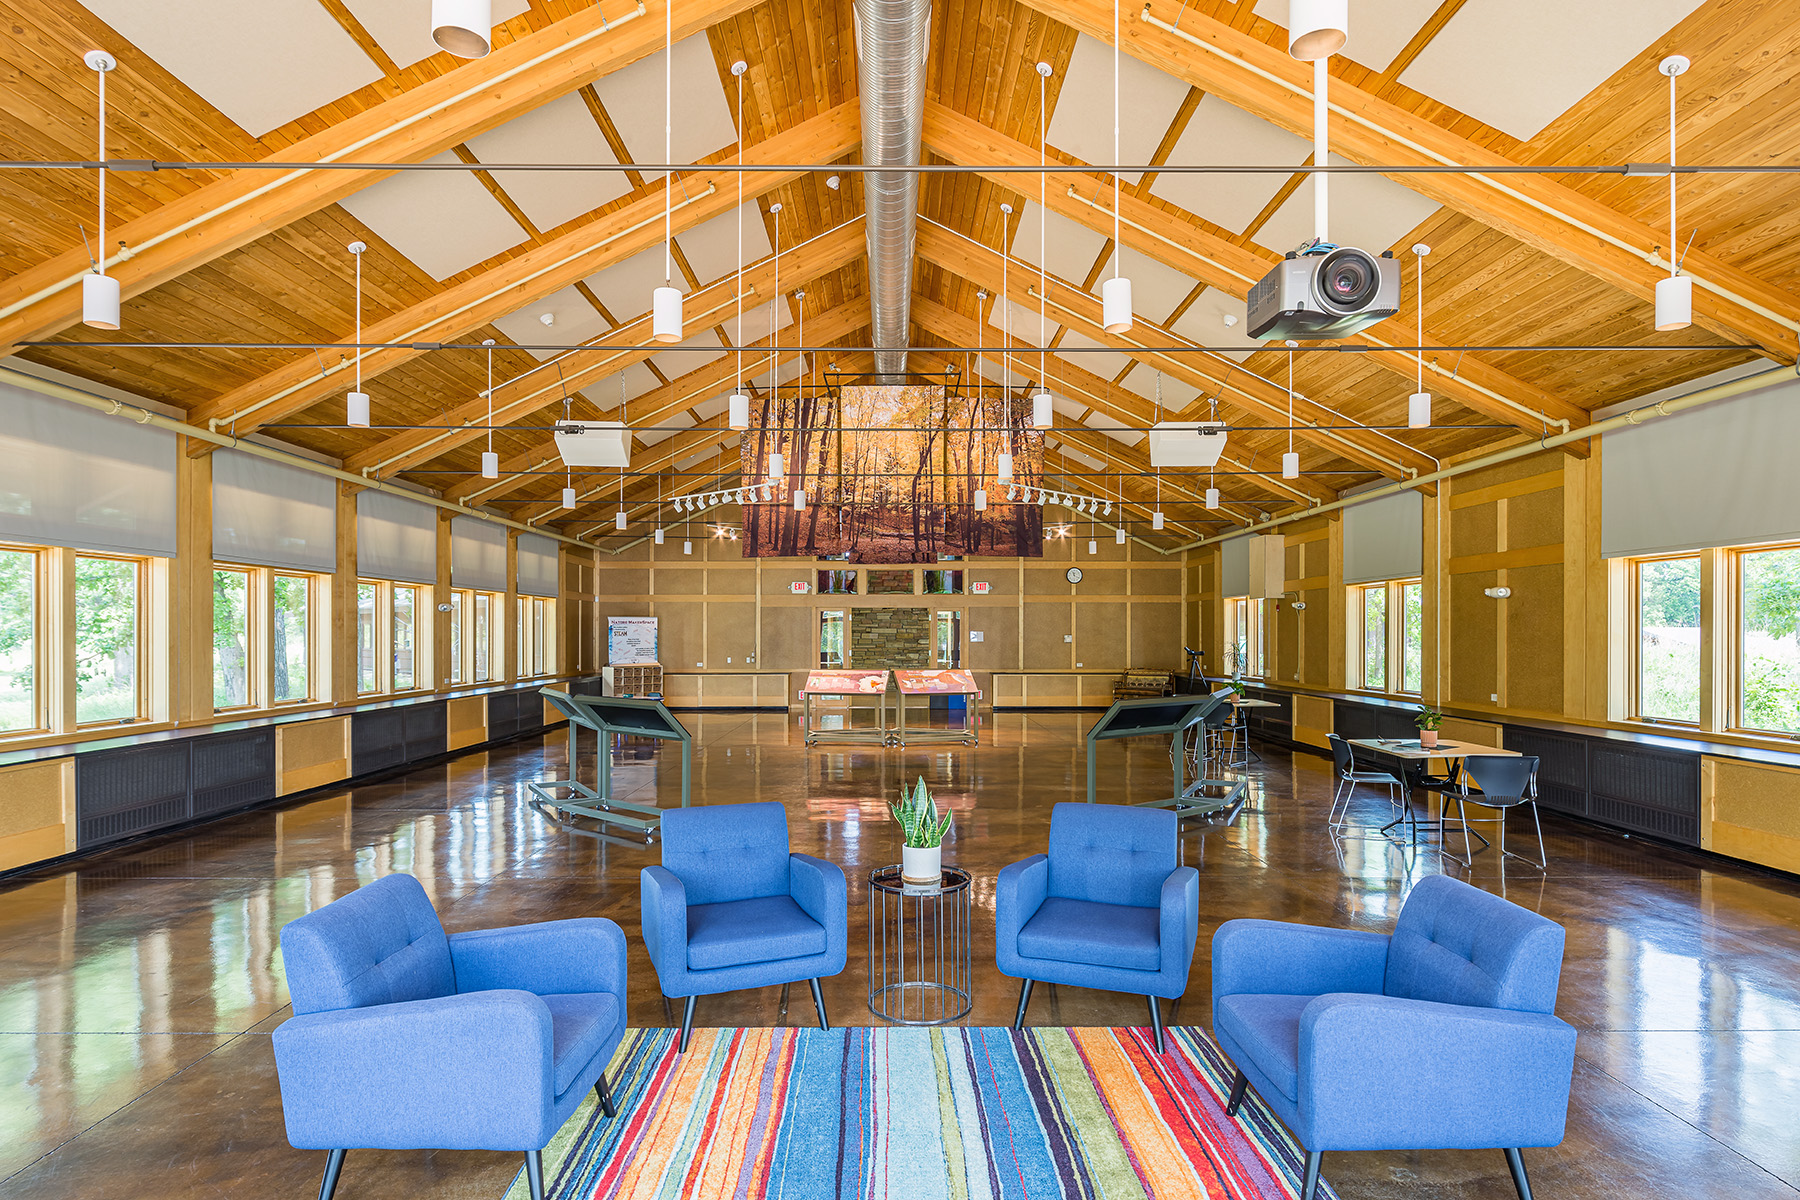 Cylinder pendant downlights provide general lighting in the Four Rivers Environmental Education Center event hall.